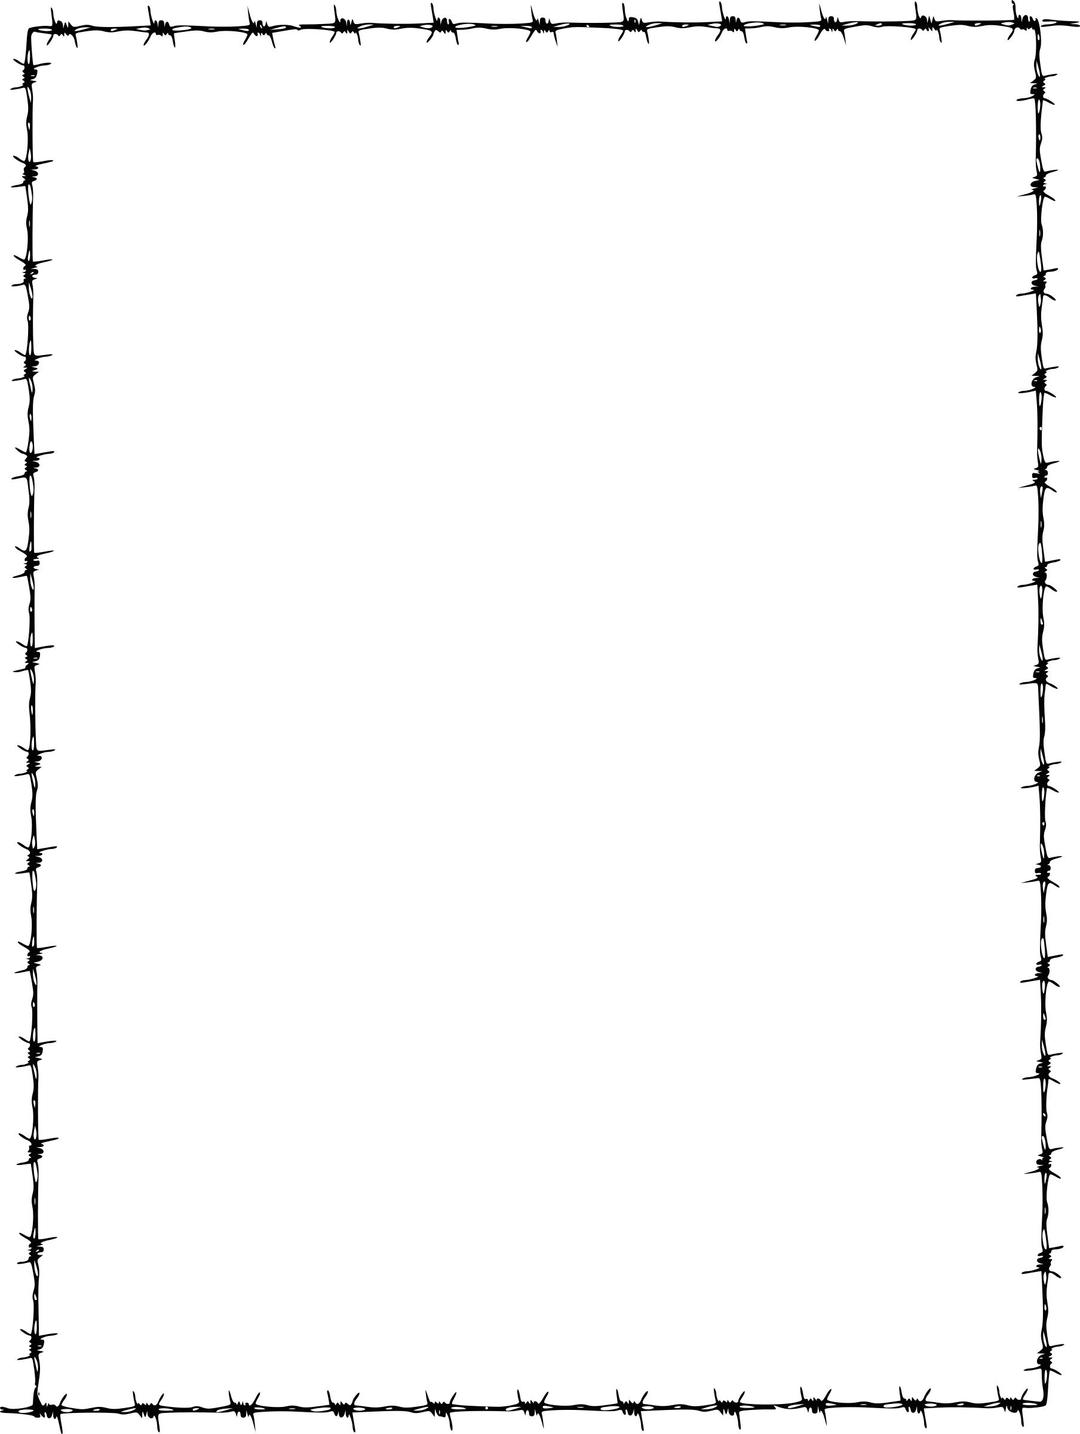 Barbed Wire Border png transparent